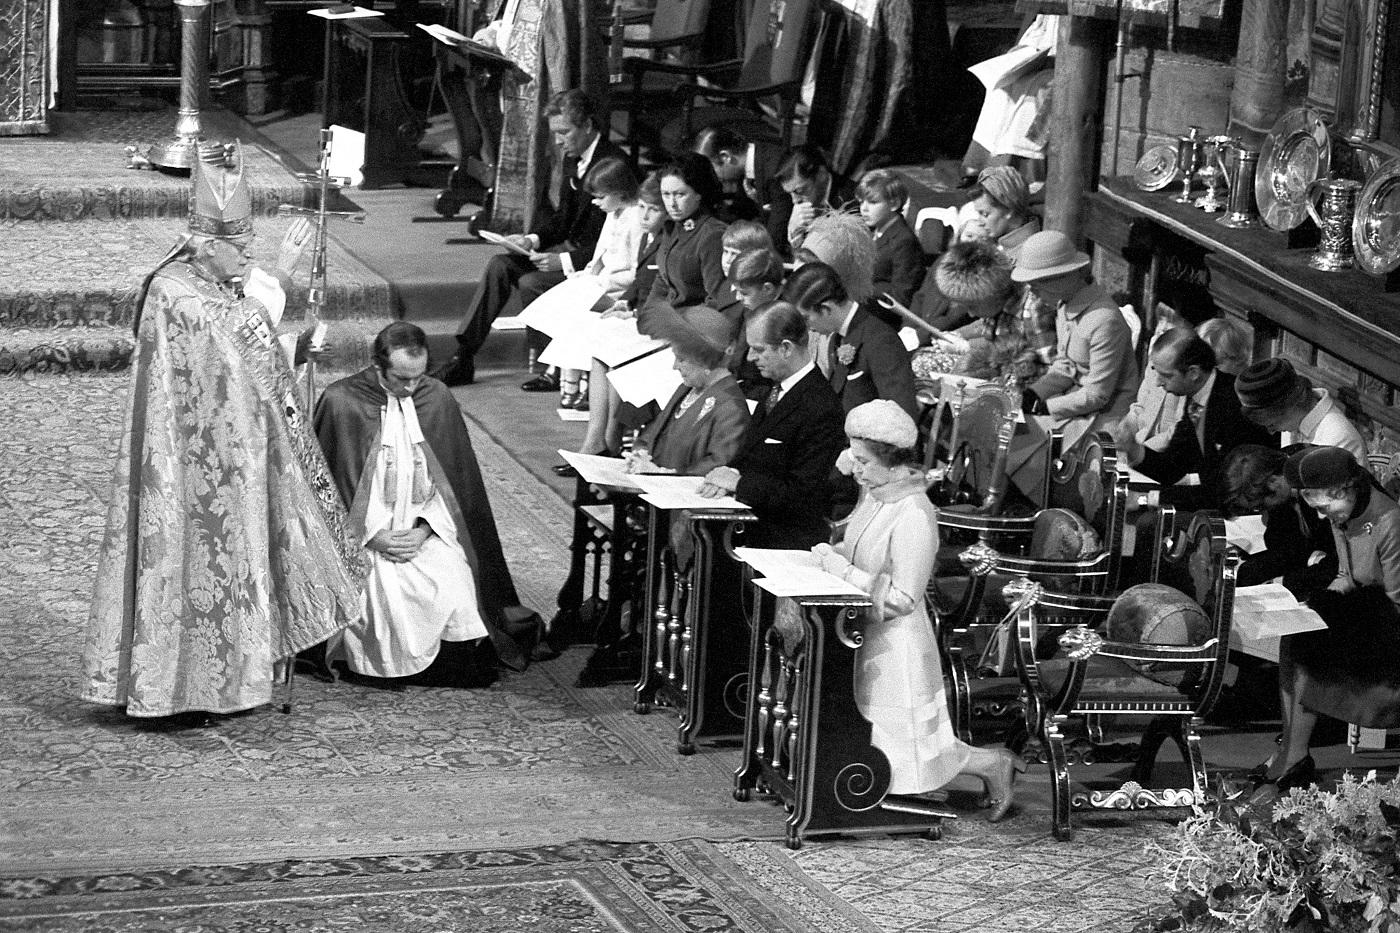 Royalty – Queen Silver Wedding Anniversary – Westminster Abbey